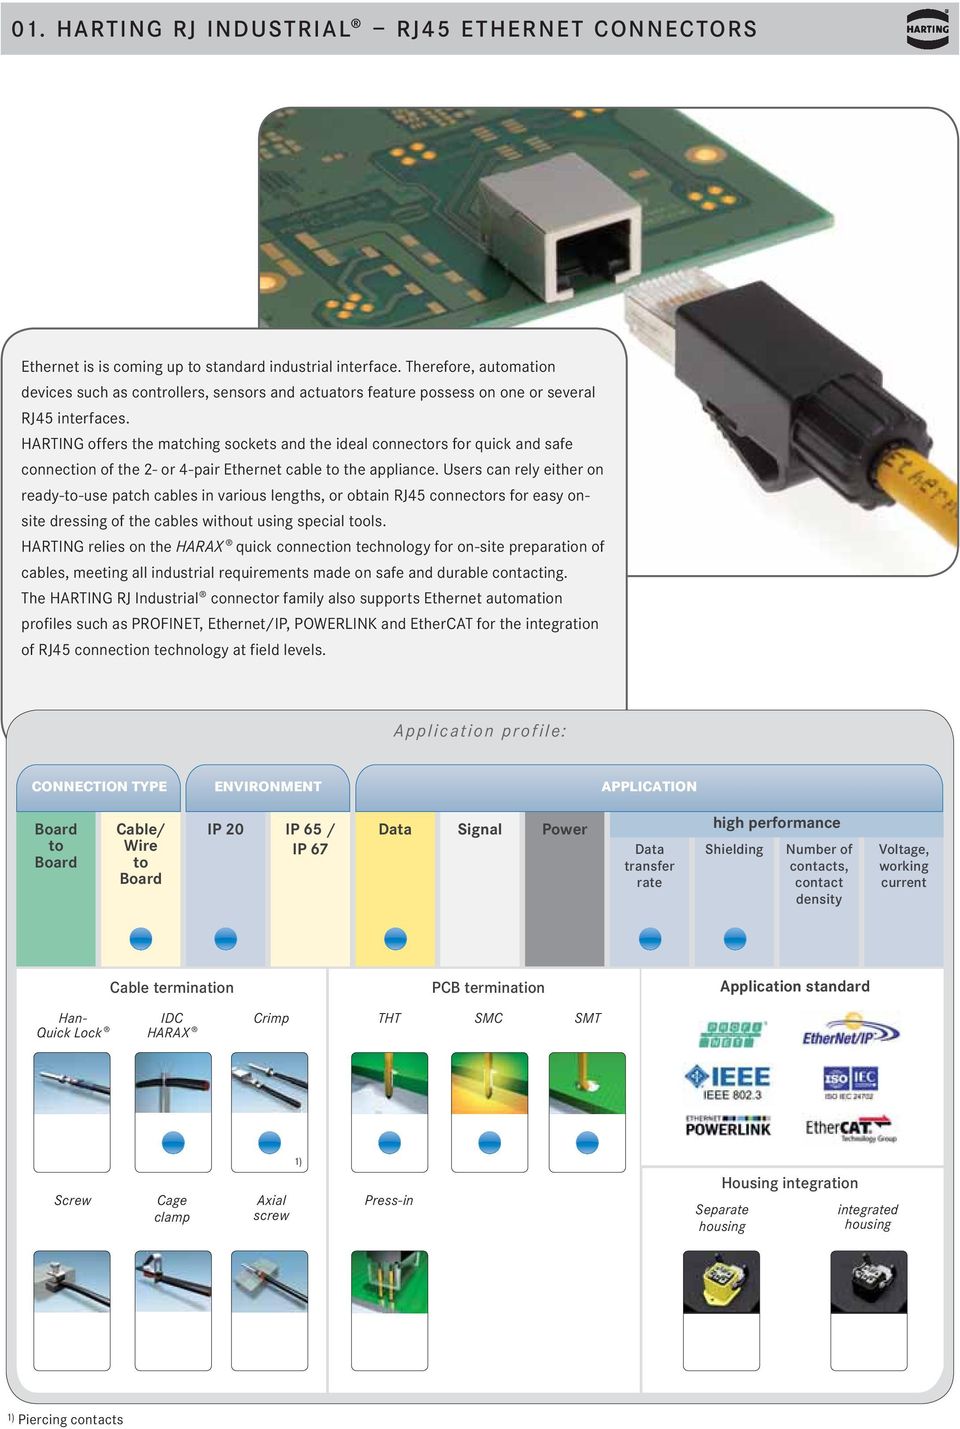 HARTING offers the matching sockets and the ideal connectors for quick and safe connection of the 2- or 4-pair Ethernet cable to the appliance.